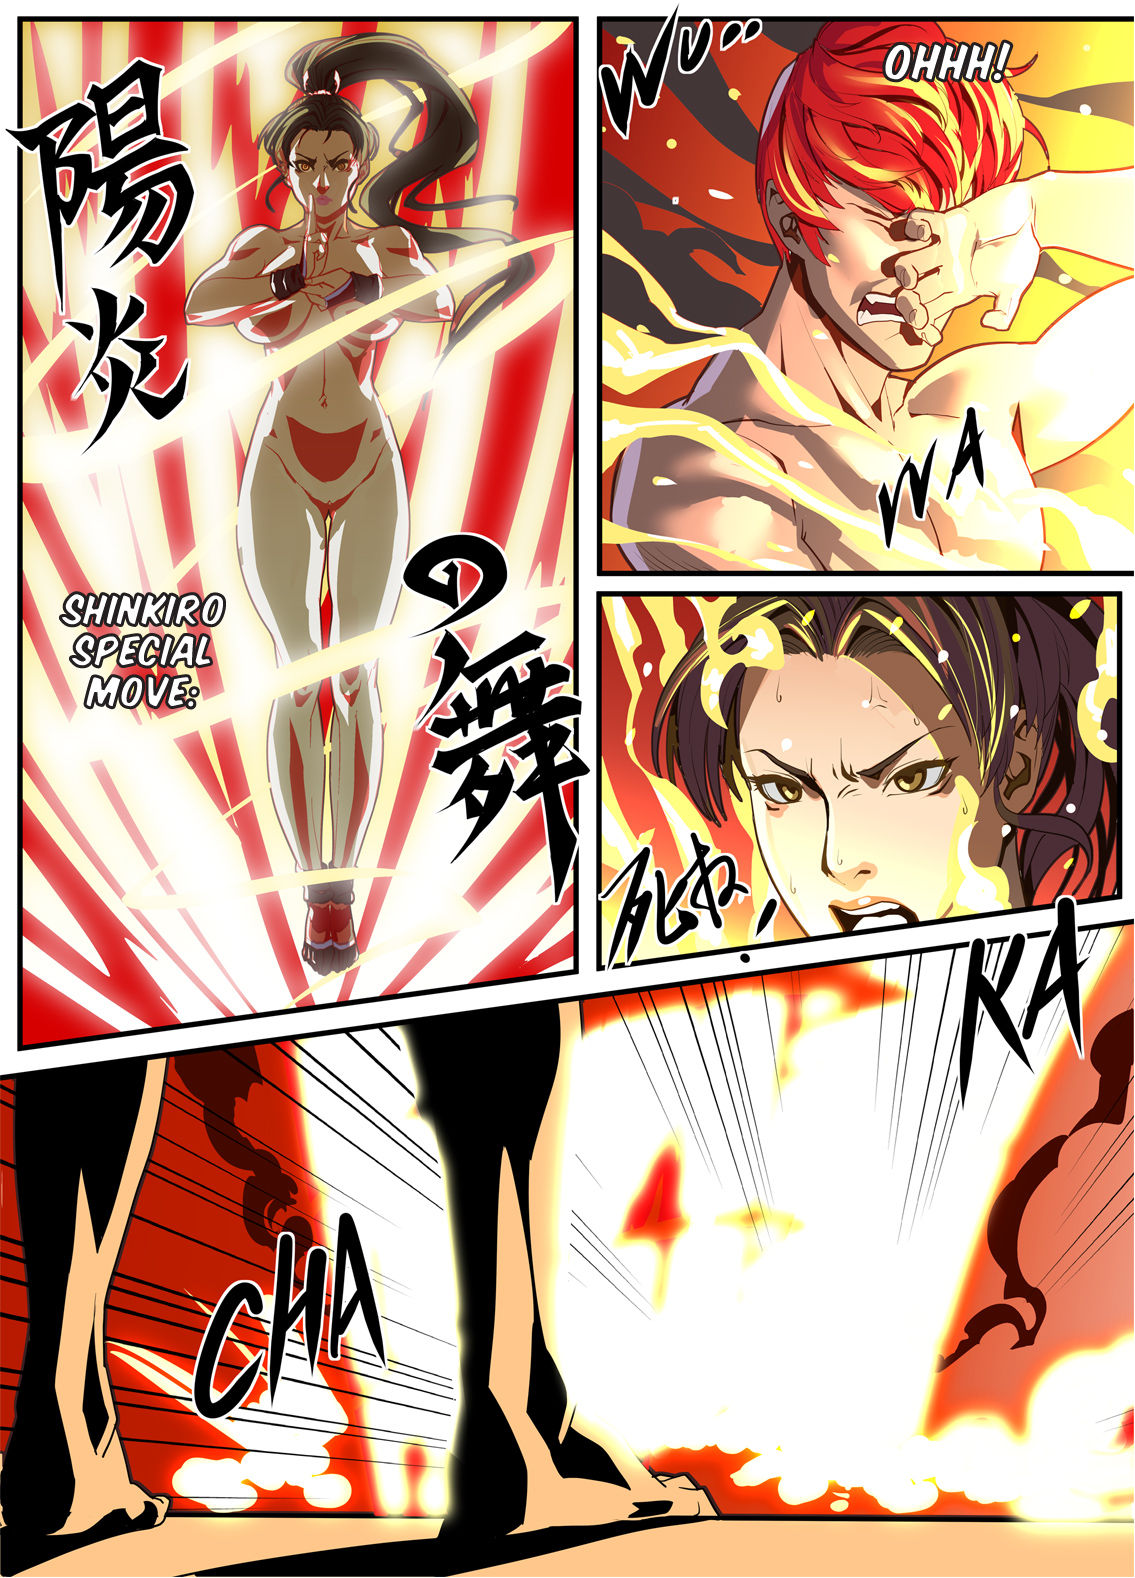 [chunlieater] The Lust of Mai Shiranui (King of Fighters) [English] [Yorkchoi & Twist] page 27 full